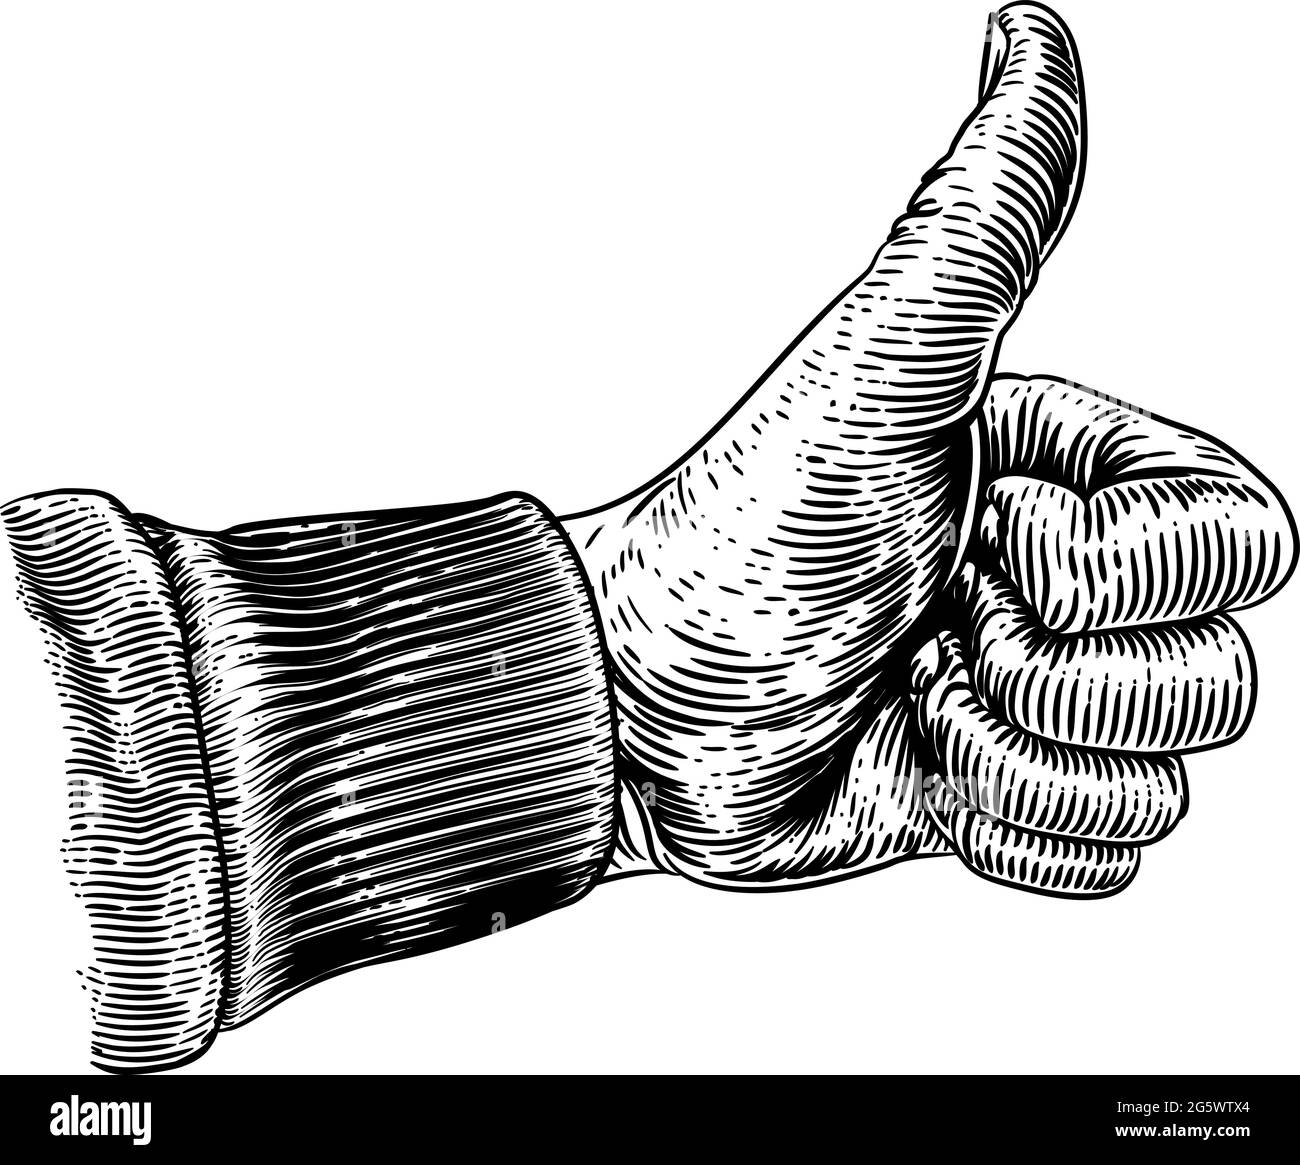 Thumb Up Sign Hand Retro Vintage Woodcut Stock Vector